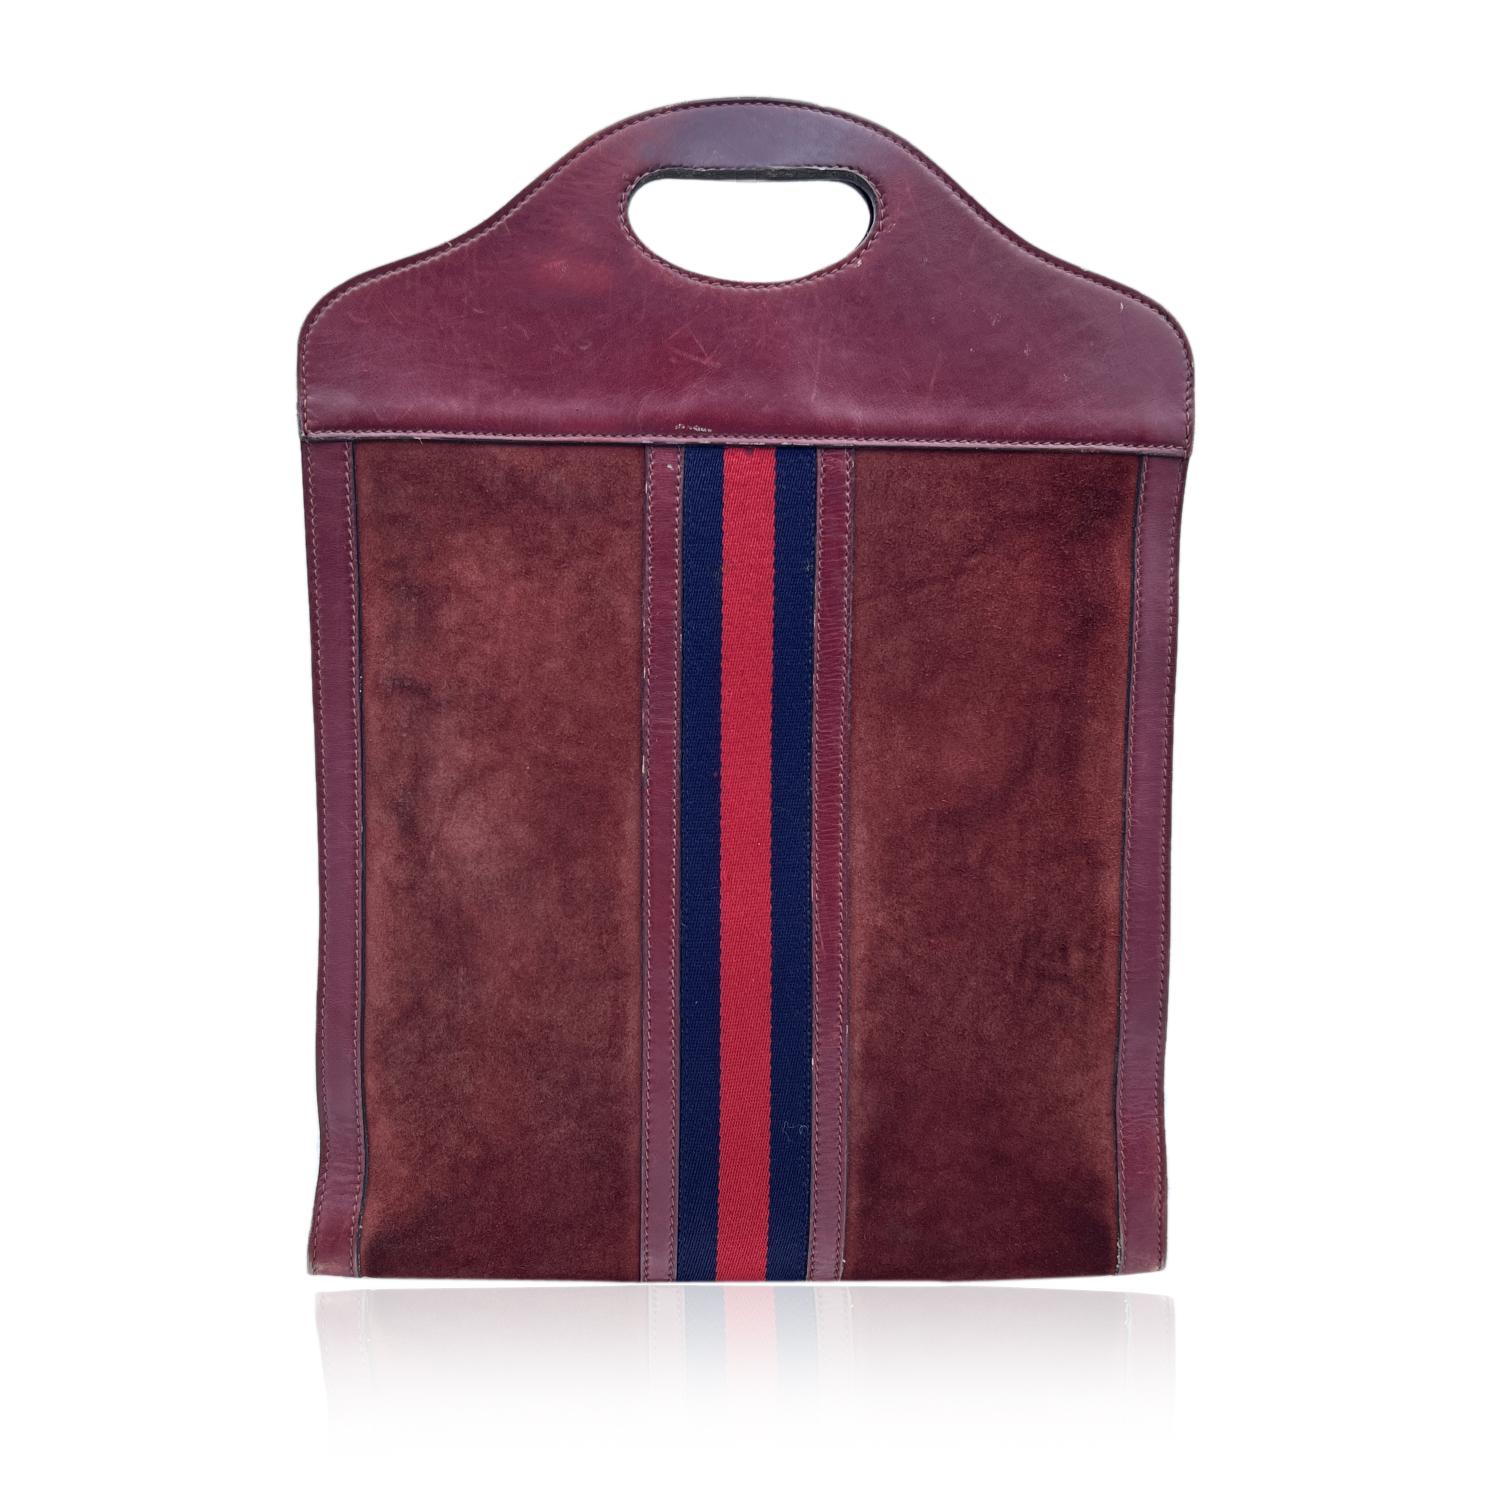 Gucci Vintage Burgundy Suede Shopping Bag Tote with Stripes In Good Condition In Rome, Rome